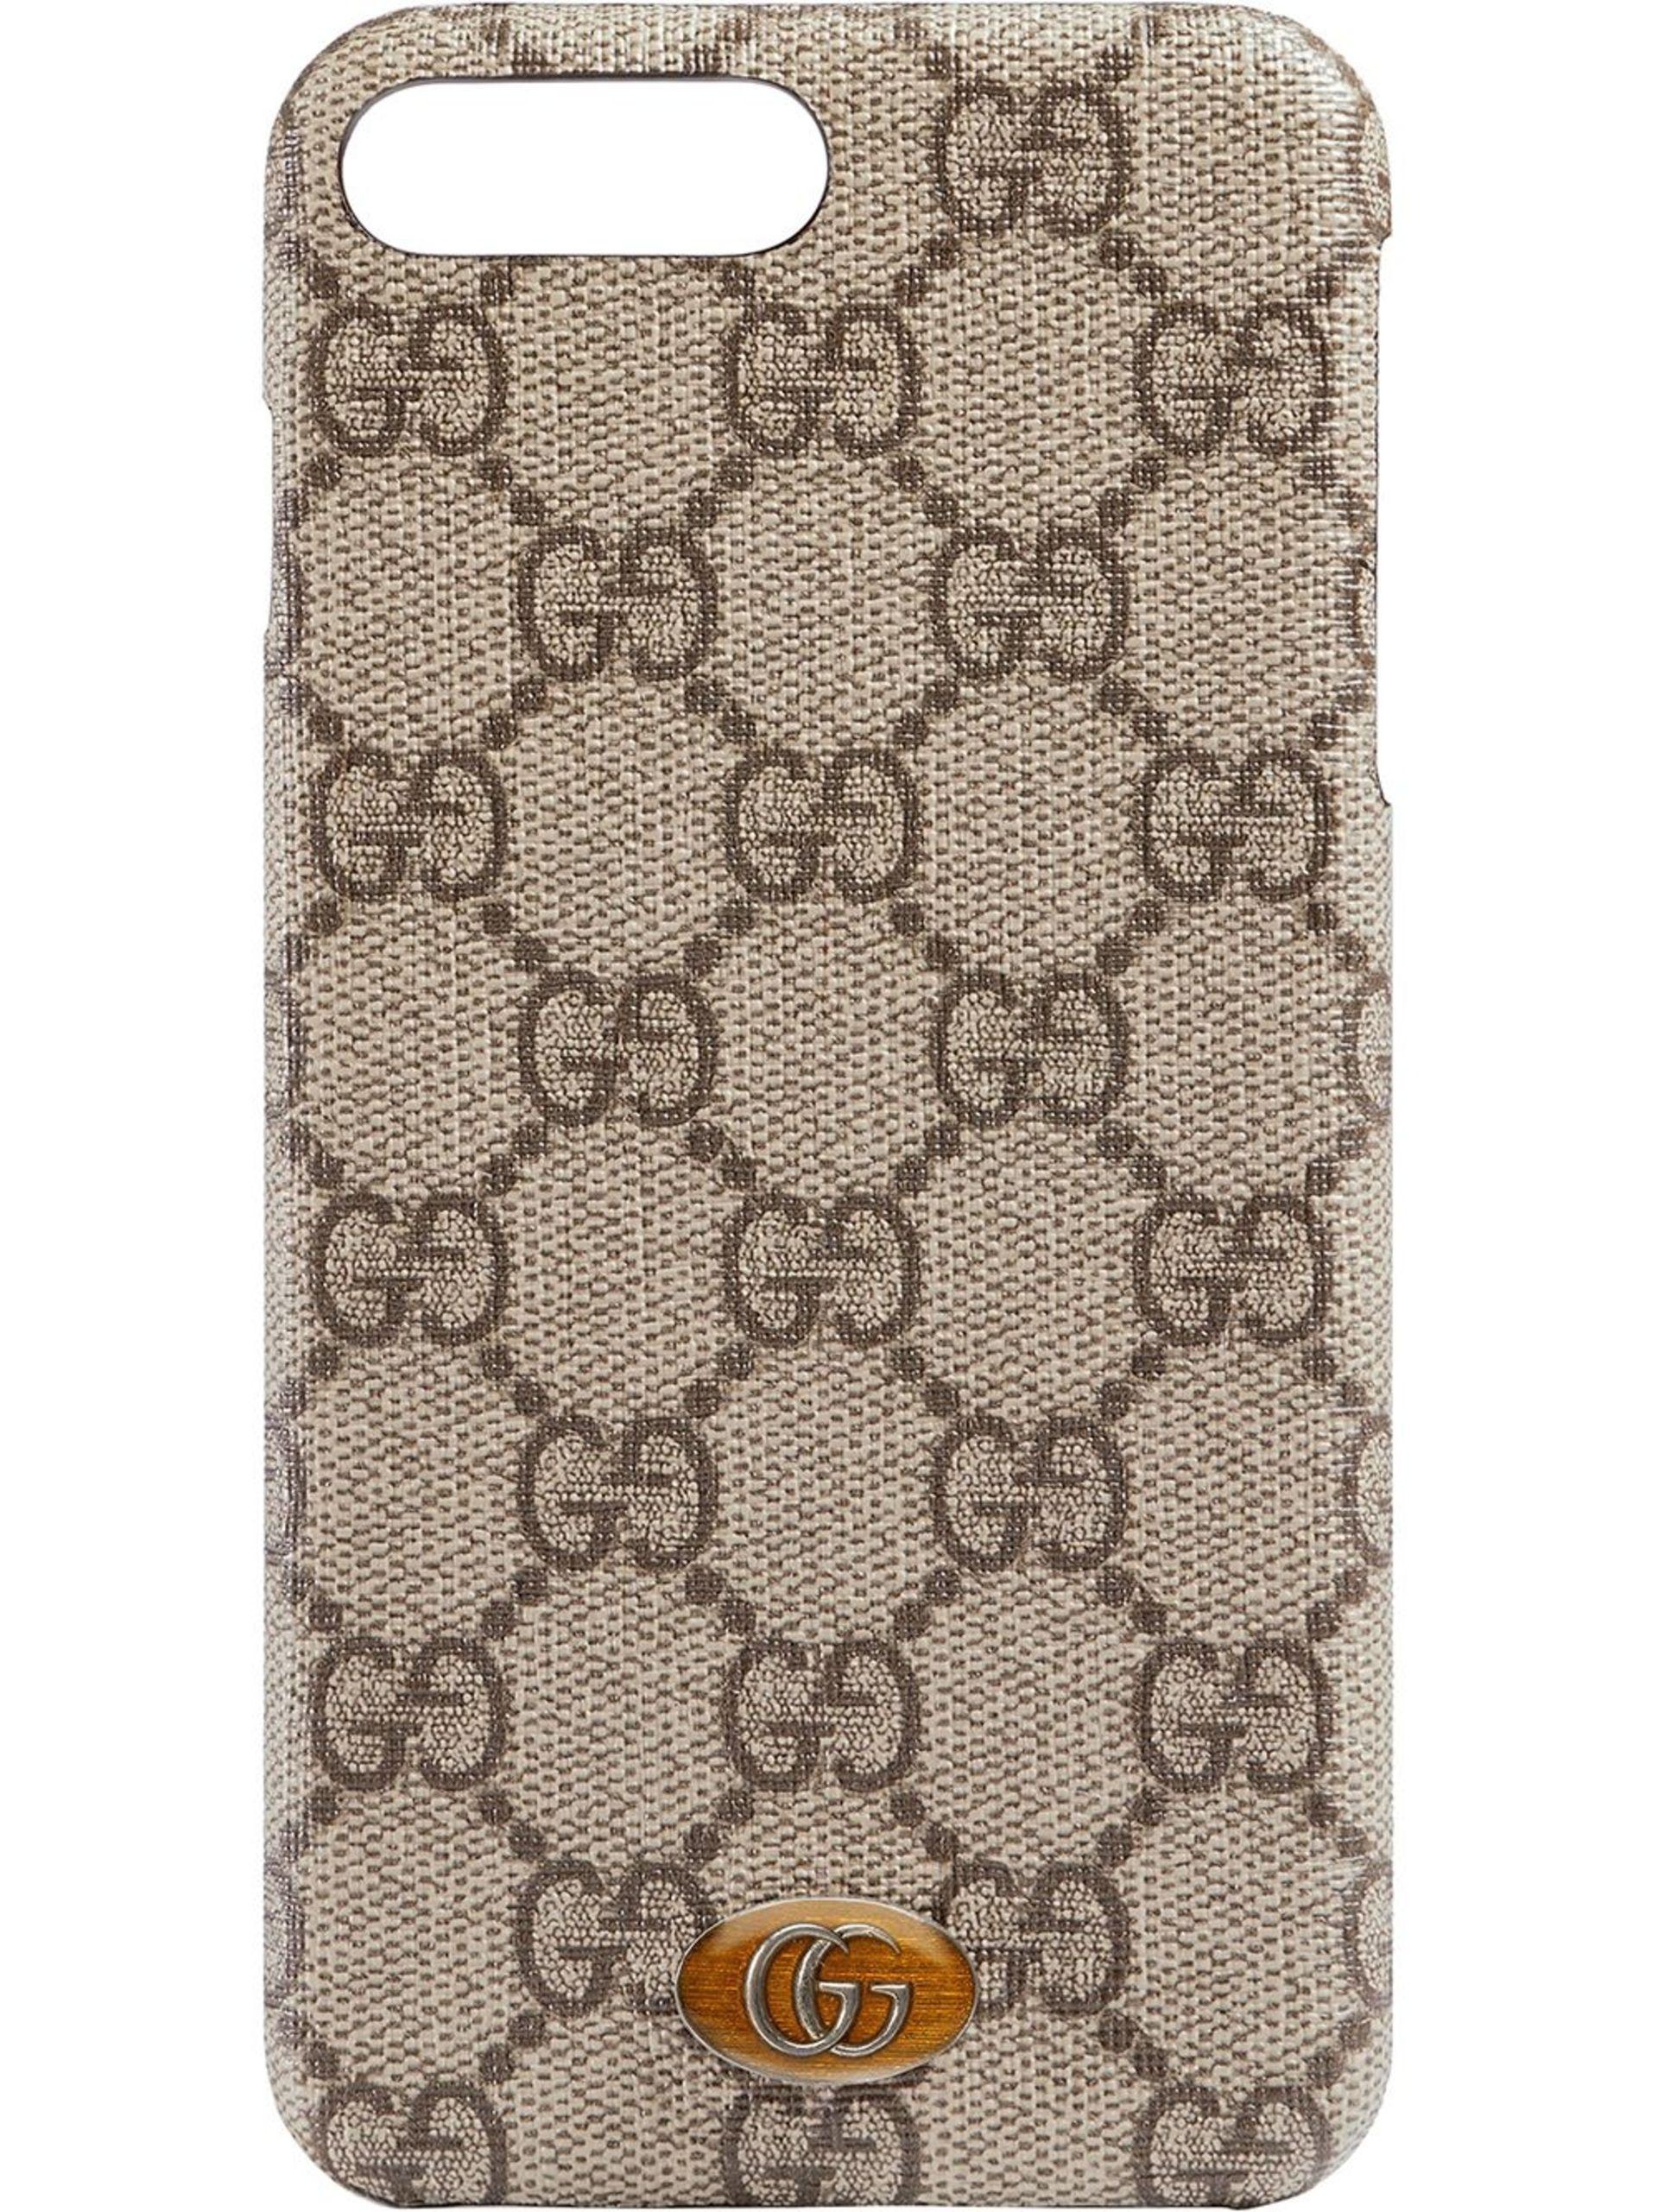 Gucci Women's Brown Ophidia Iphone 8 Plus Case